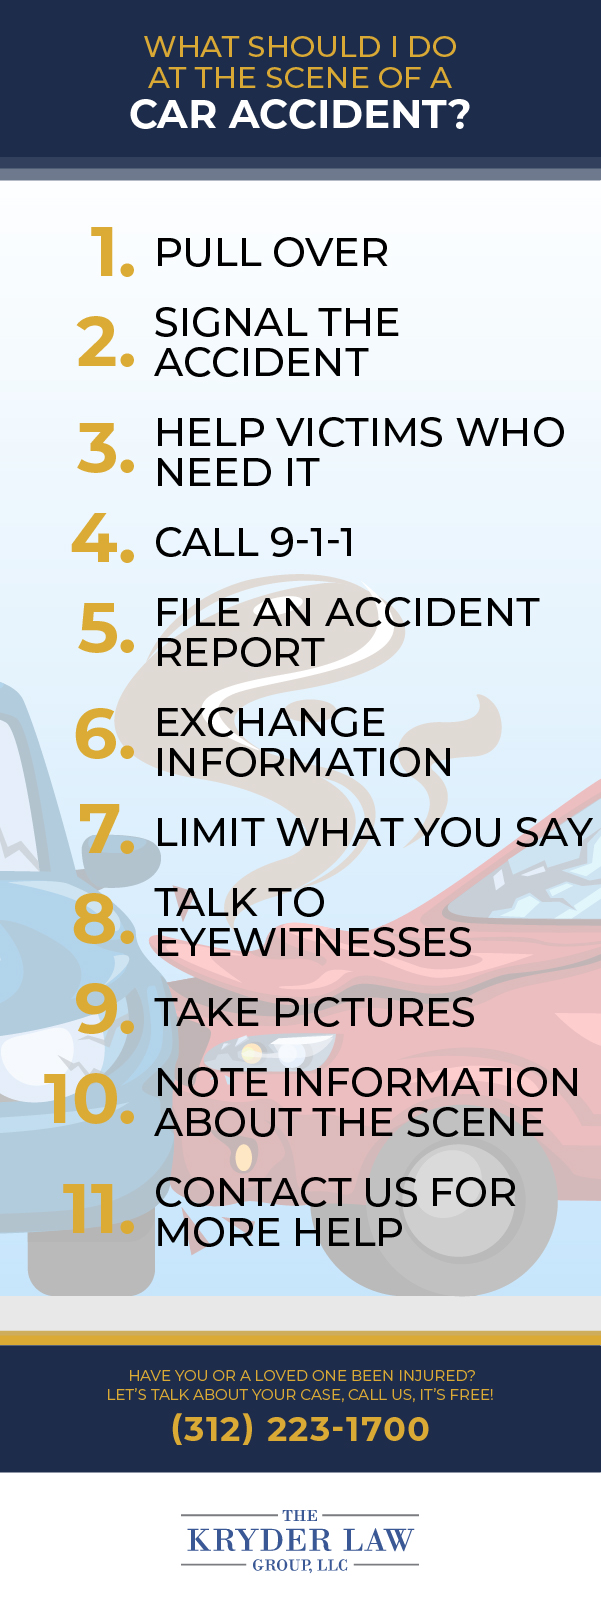 What Should I Do at the Scene of a Car Accident Infographic